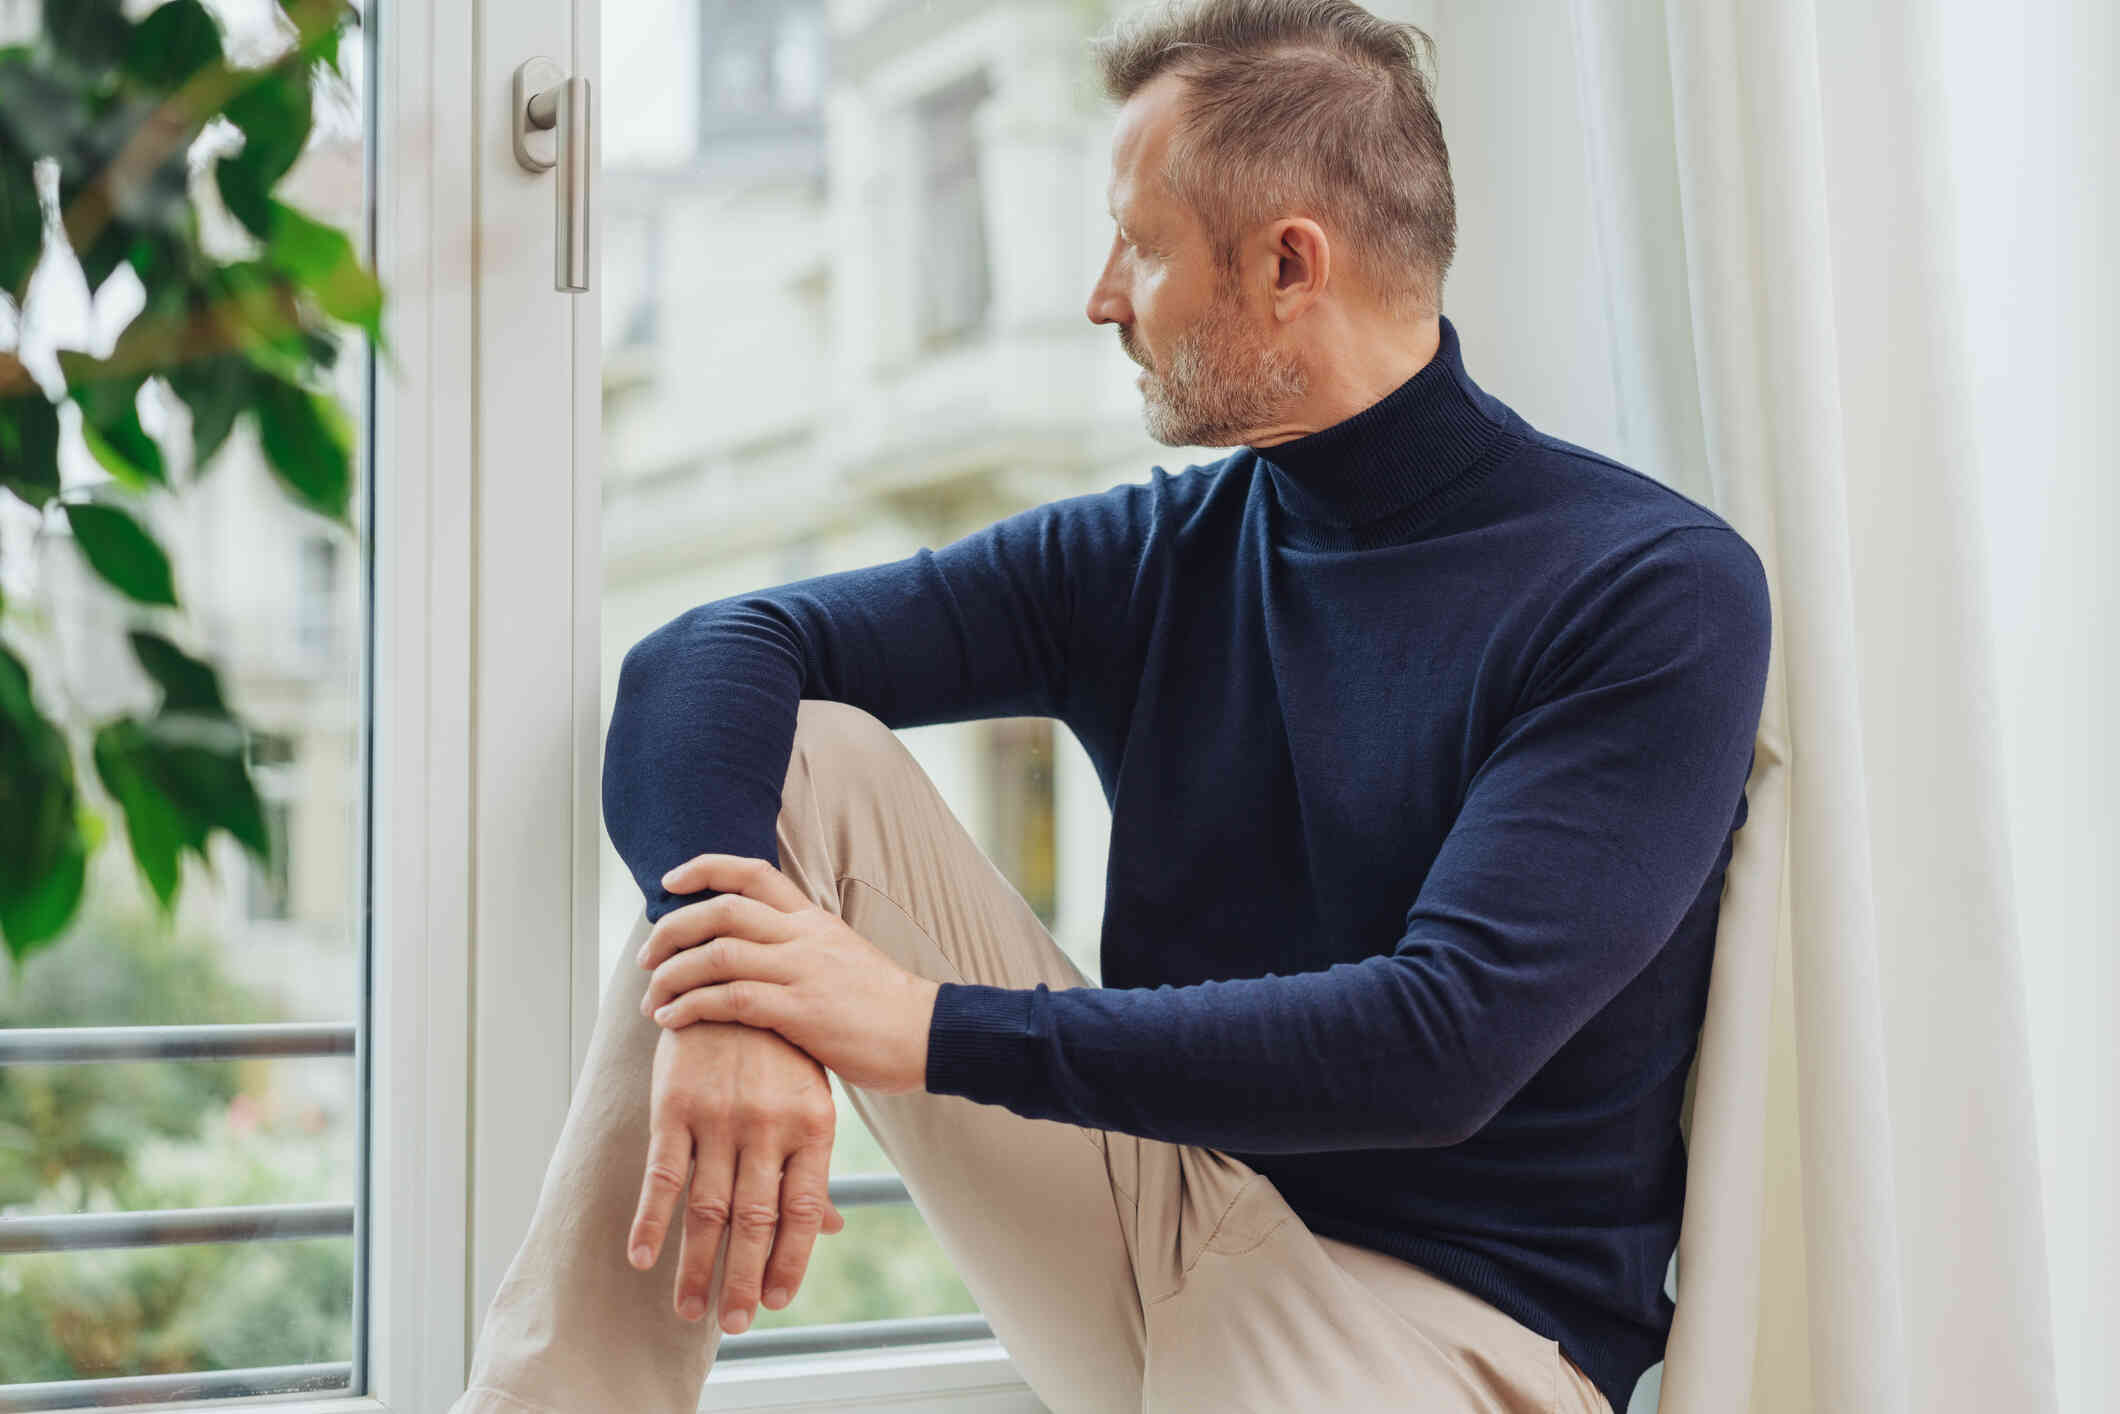 A man in a blue turtleneck sits in a wondow sill and gazes out while deep in thought.